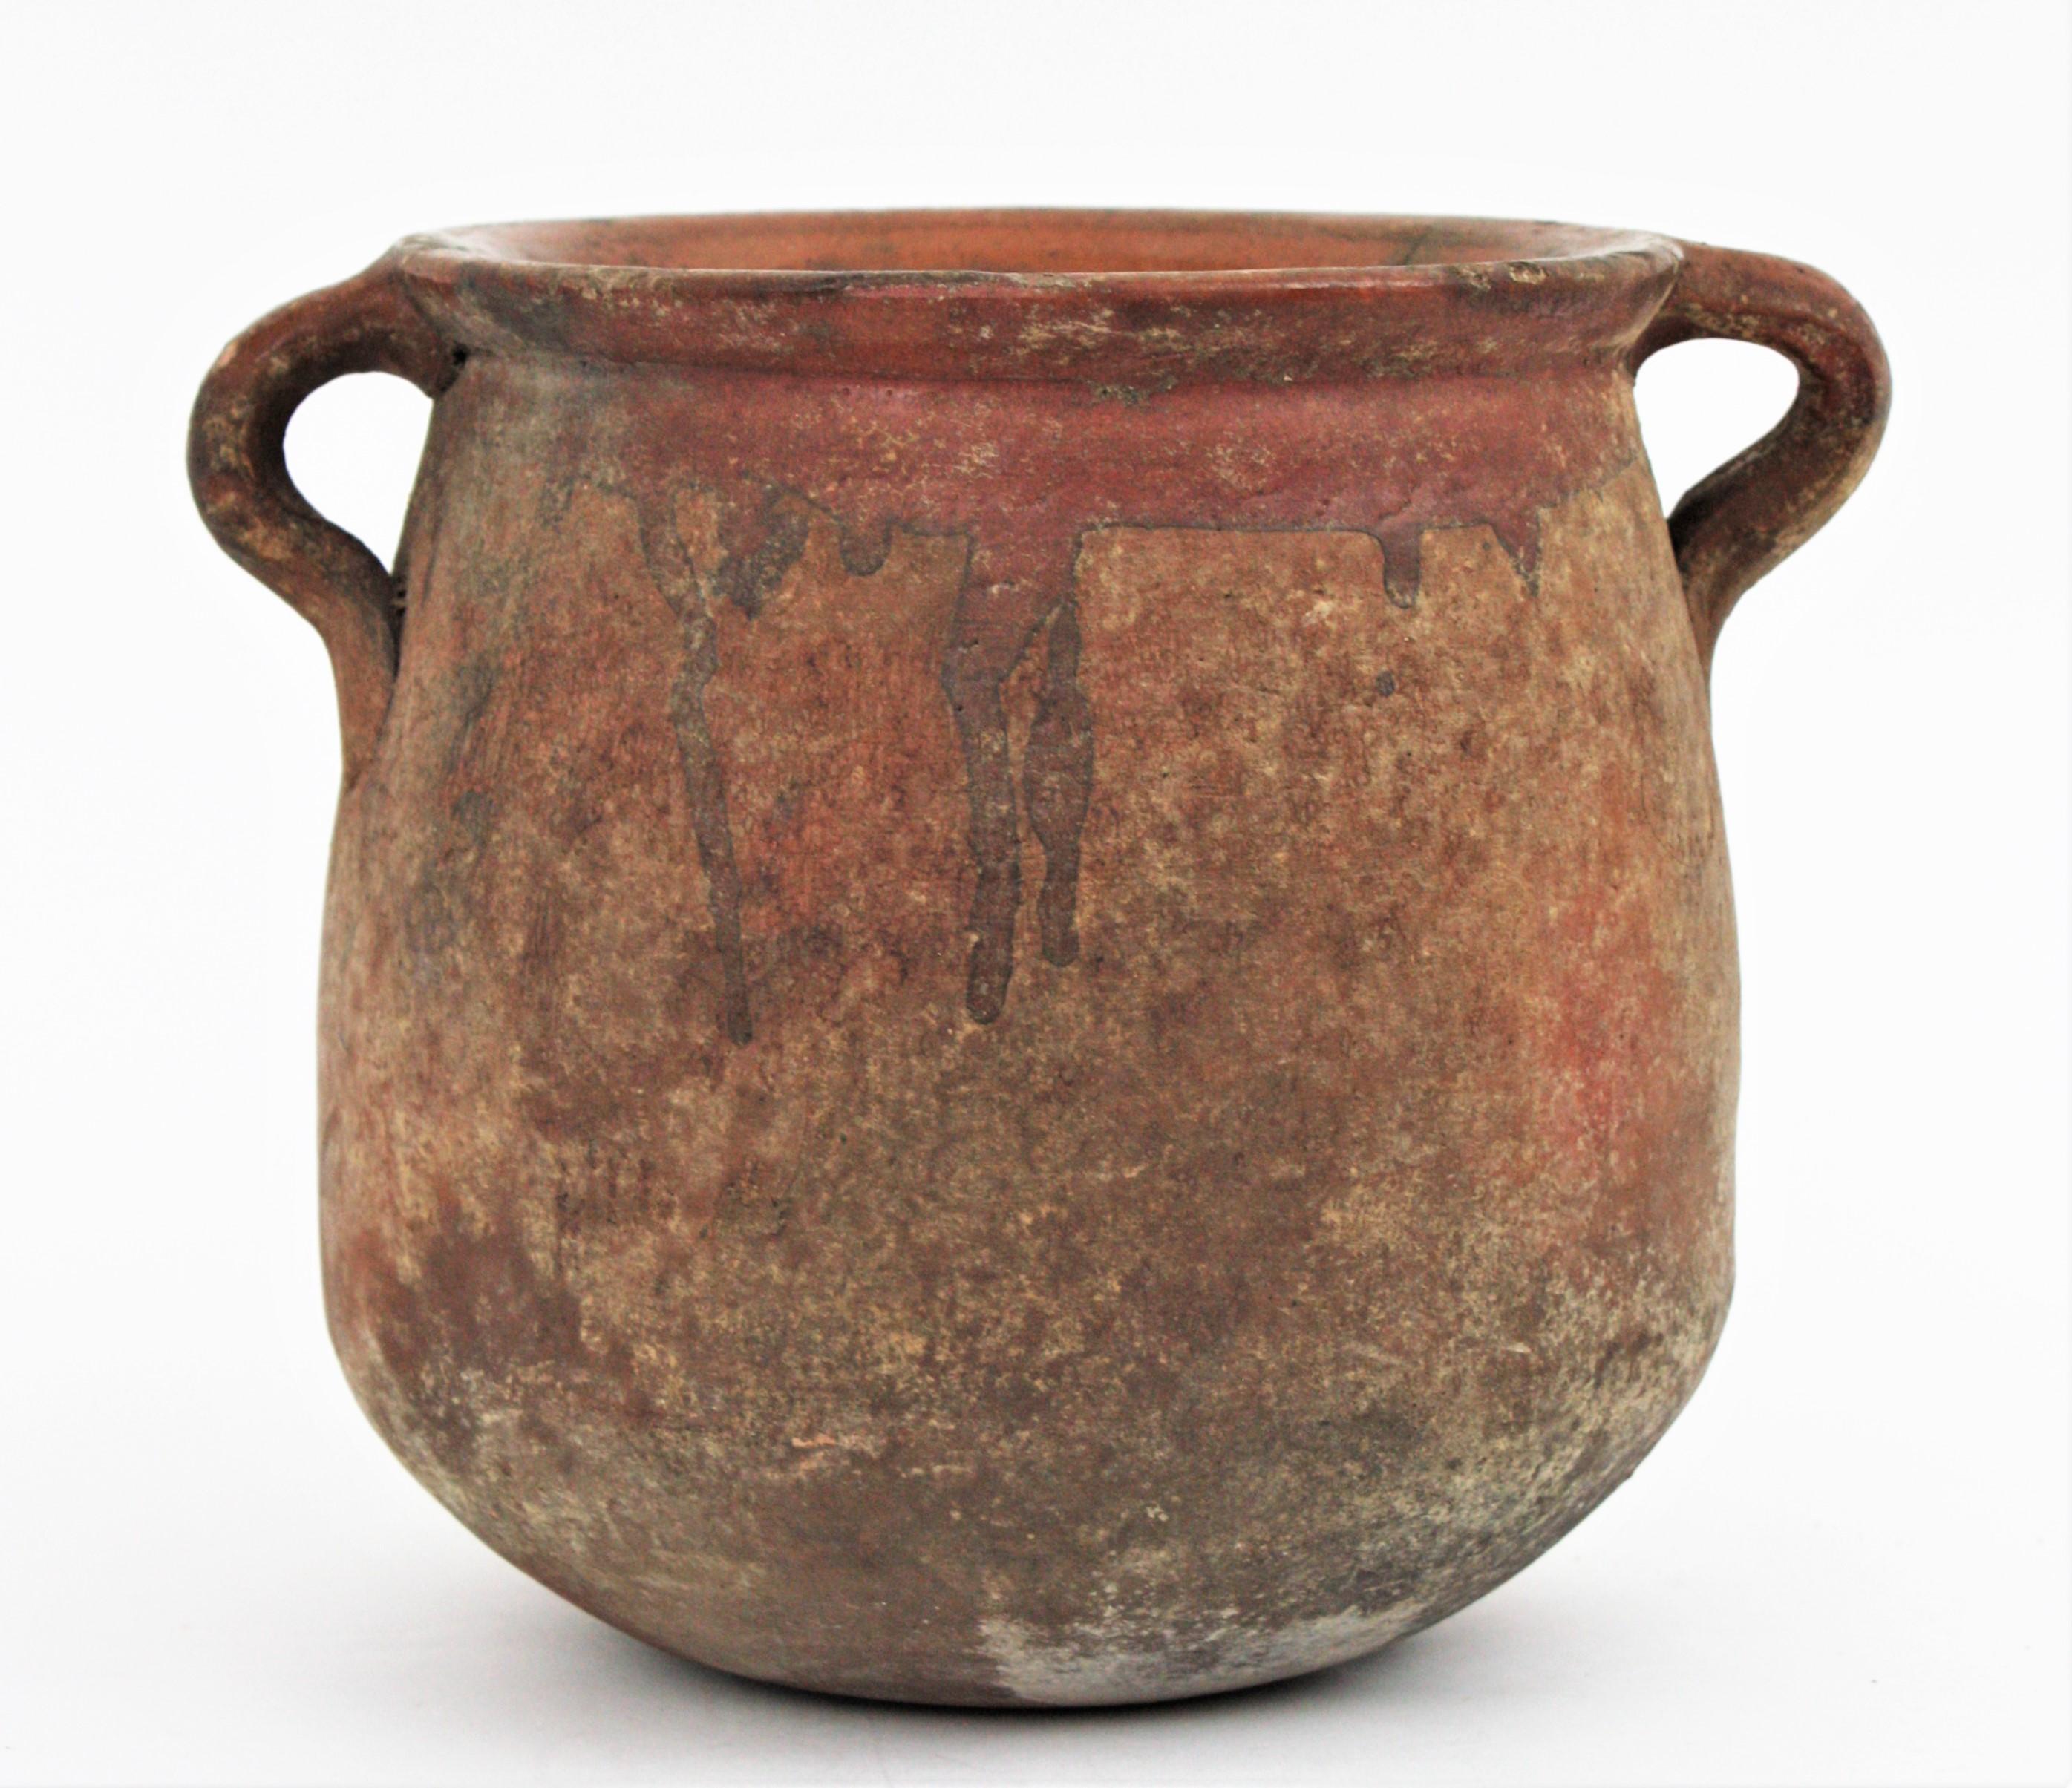 Handmade terracotta preserving pot with handles from Catalonia. Spain, 19th century.
Traditional catalan spanish ceramic 'olla'. Unglazed exterior with handles at both sides and glazed interior to preserve food. Dramatic antique patina.
Use it as